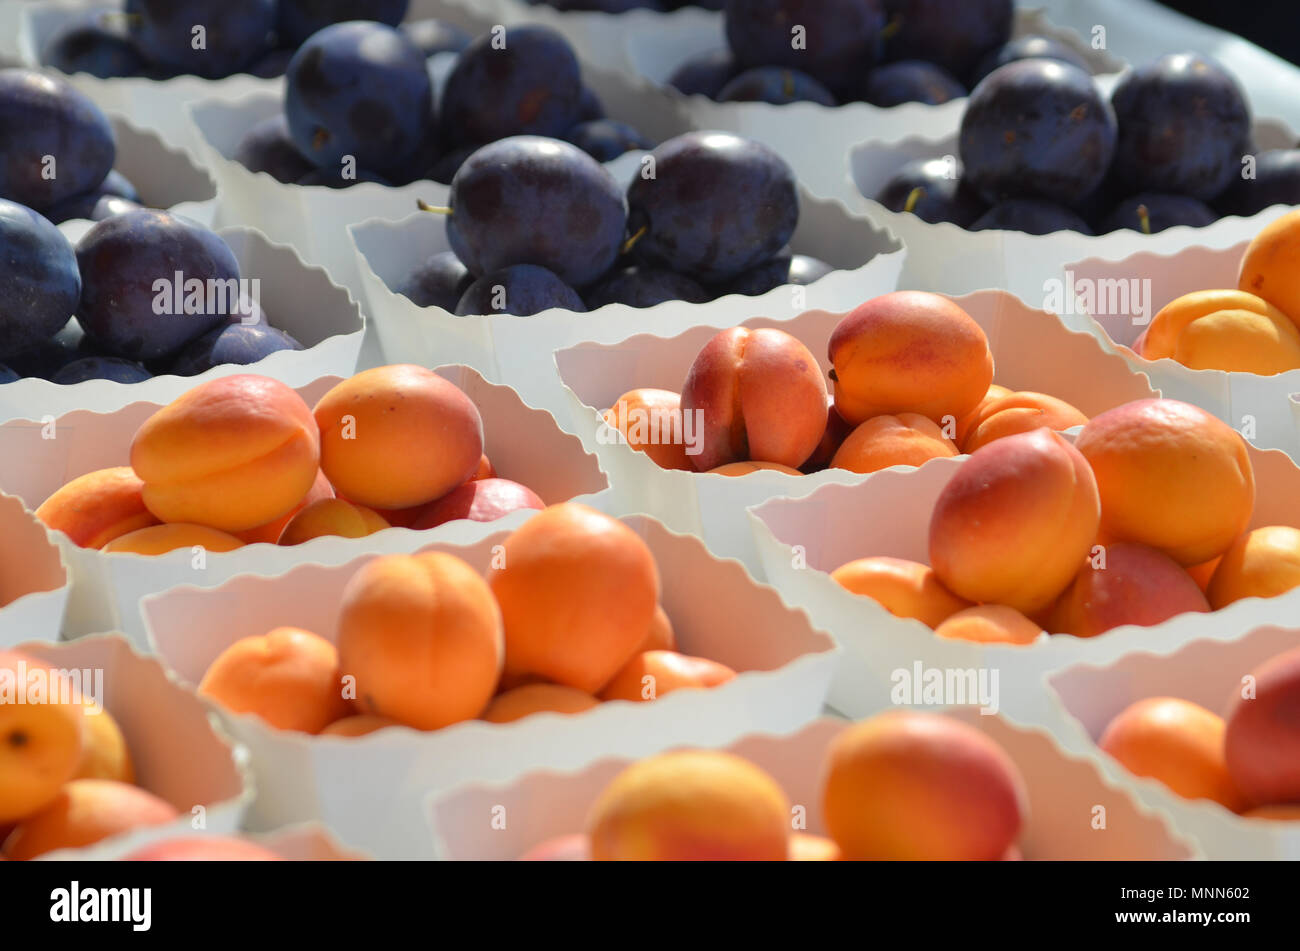 Closeup of fresh plums and apricots at the Cours Saleya produce market in Nice, France, plum Stock Photo